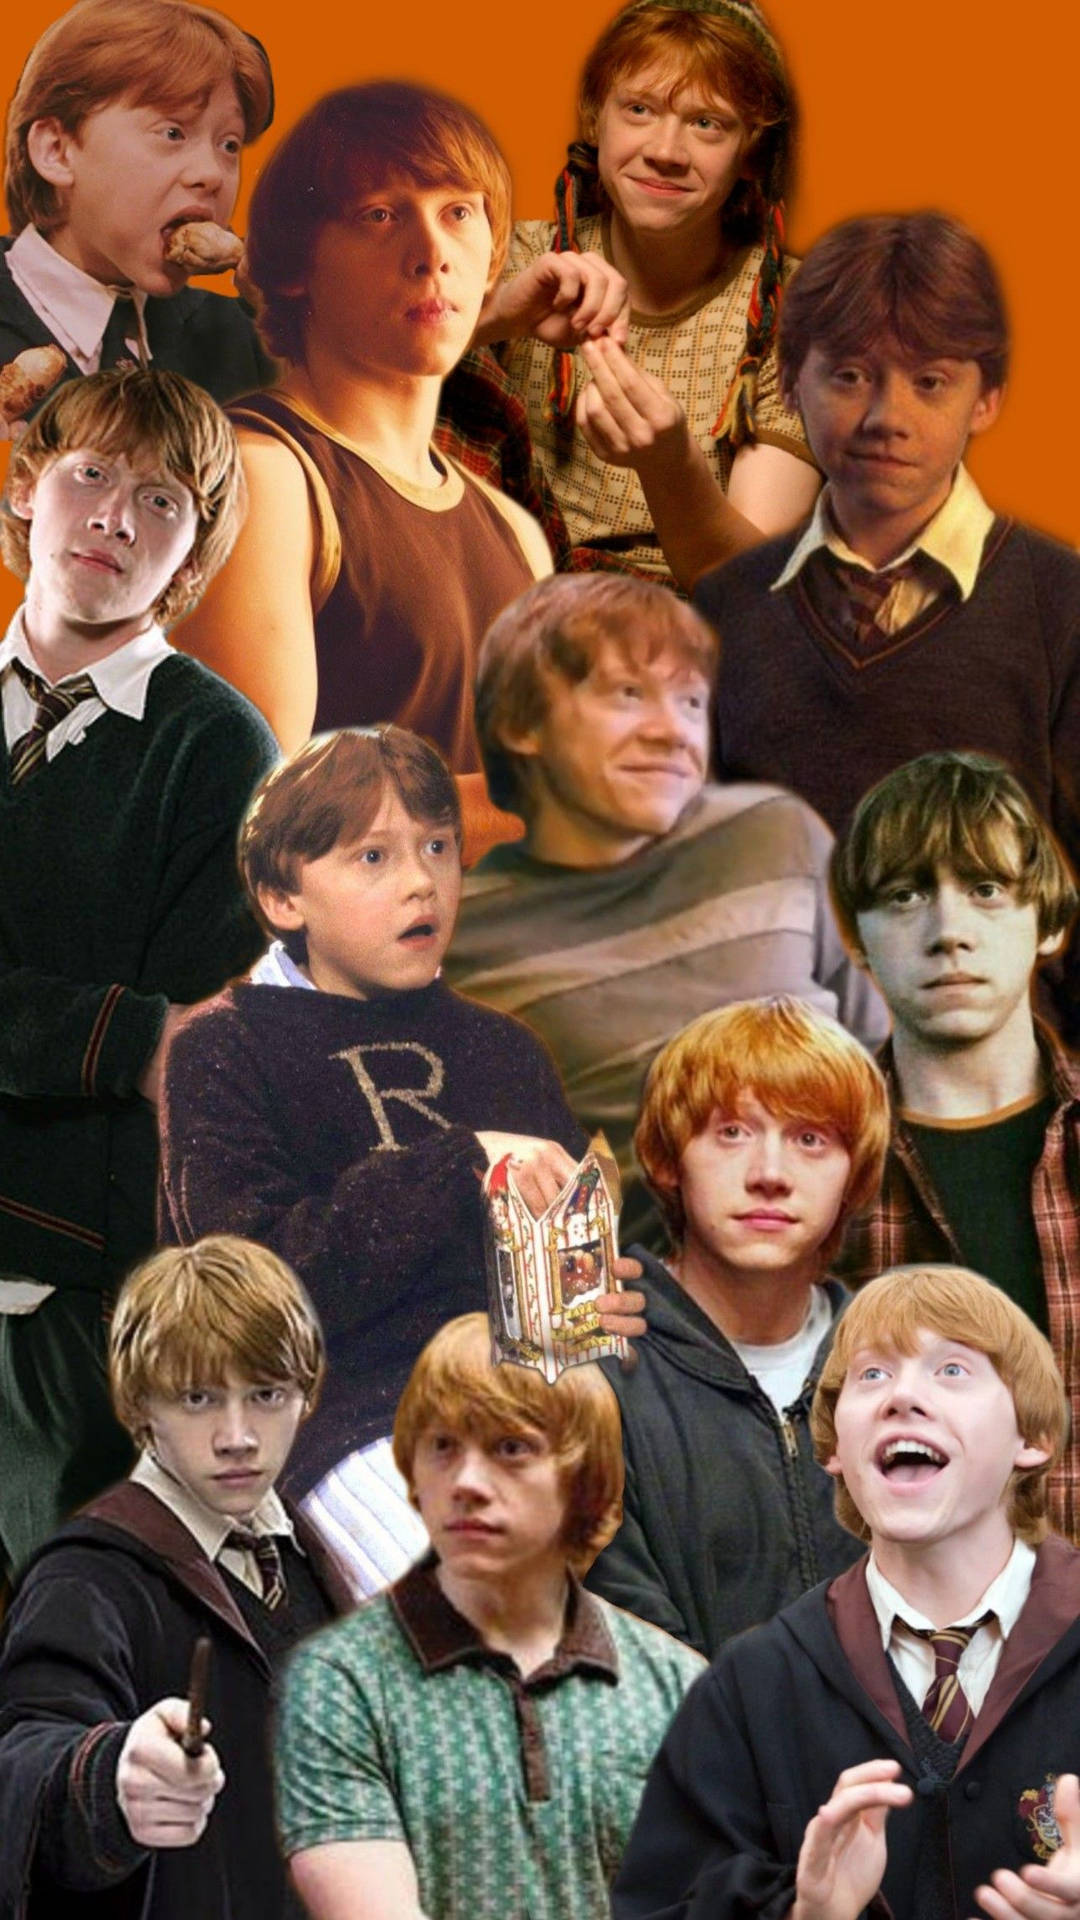 A Portrait Of Ron Weasley, The Loyal Friend And Loyal Gryffindor From The Harry Potter Series Background